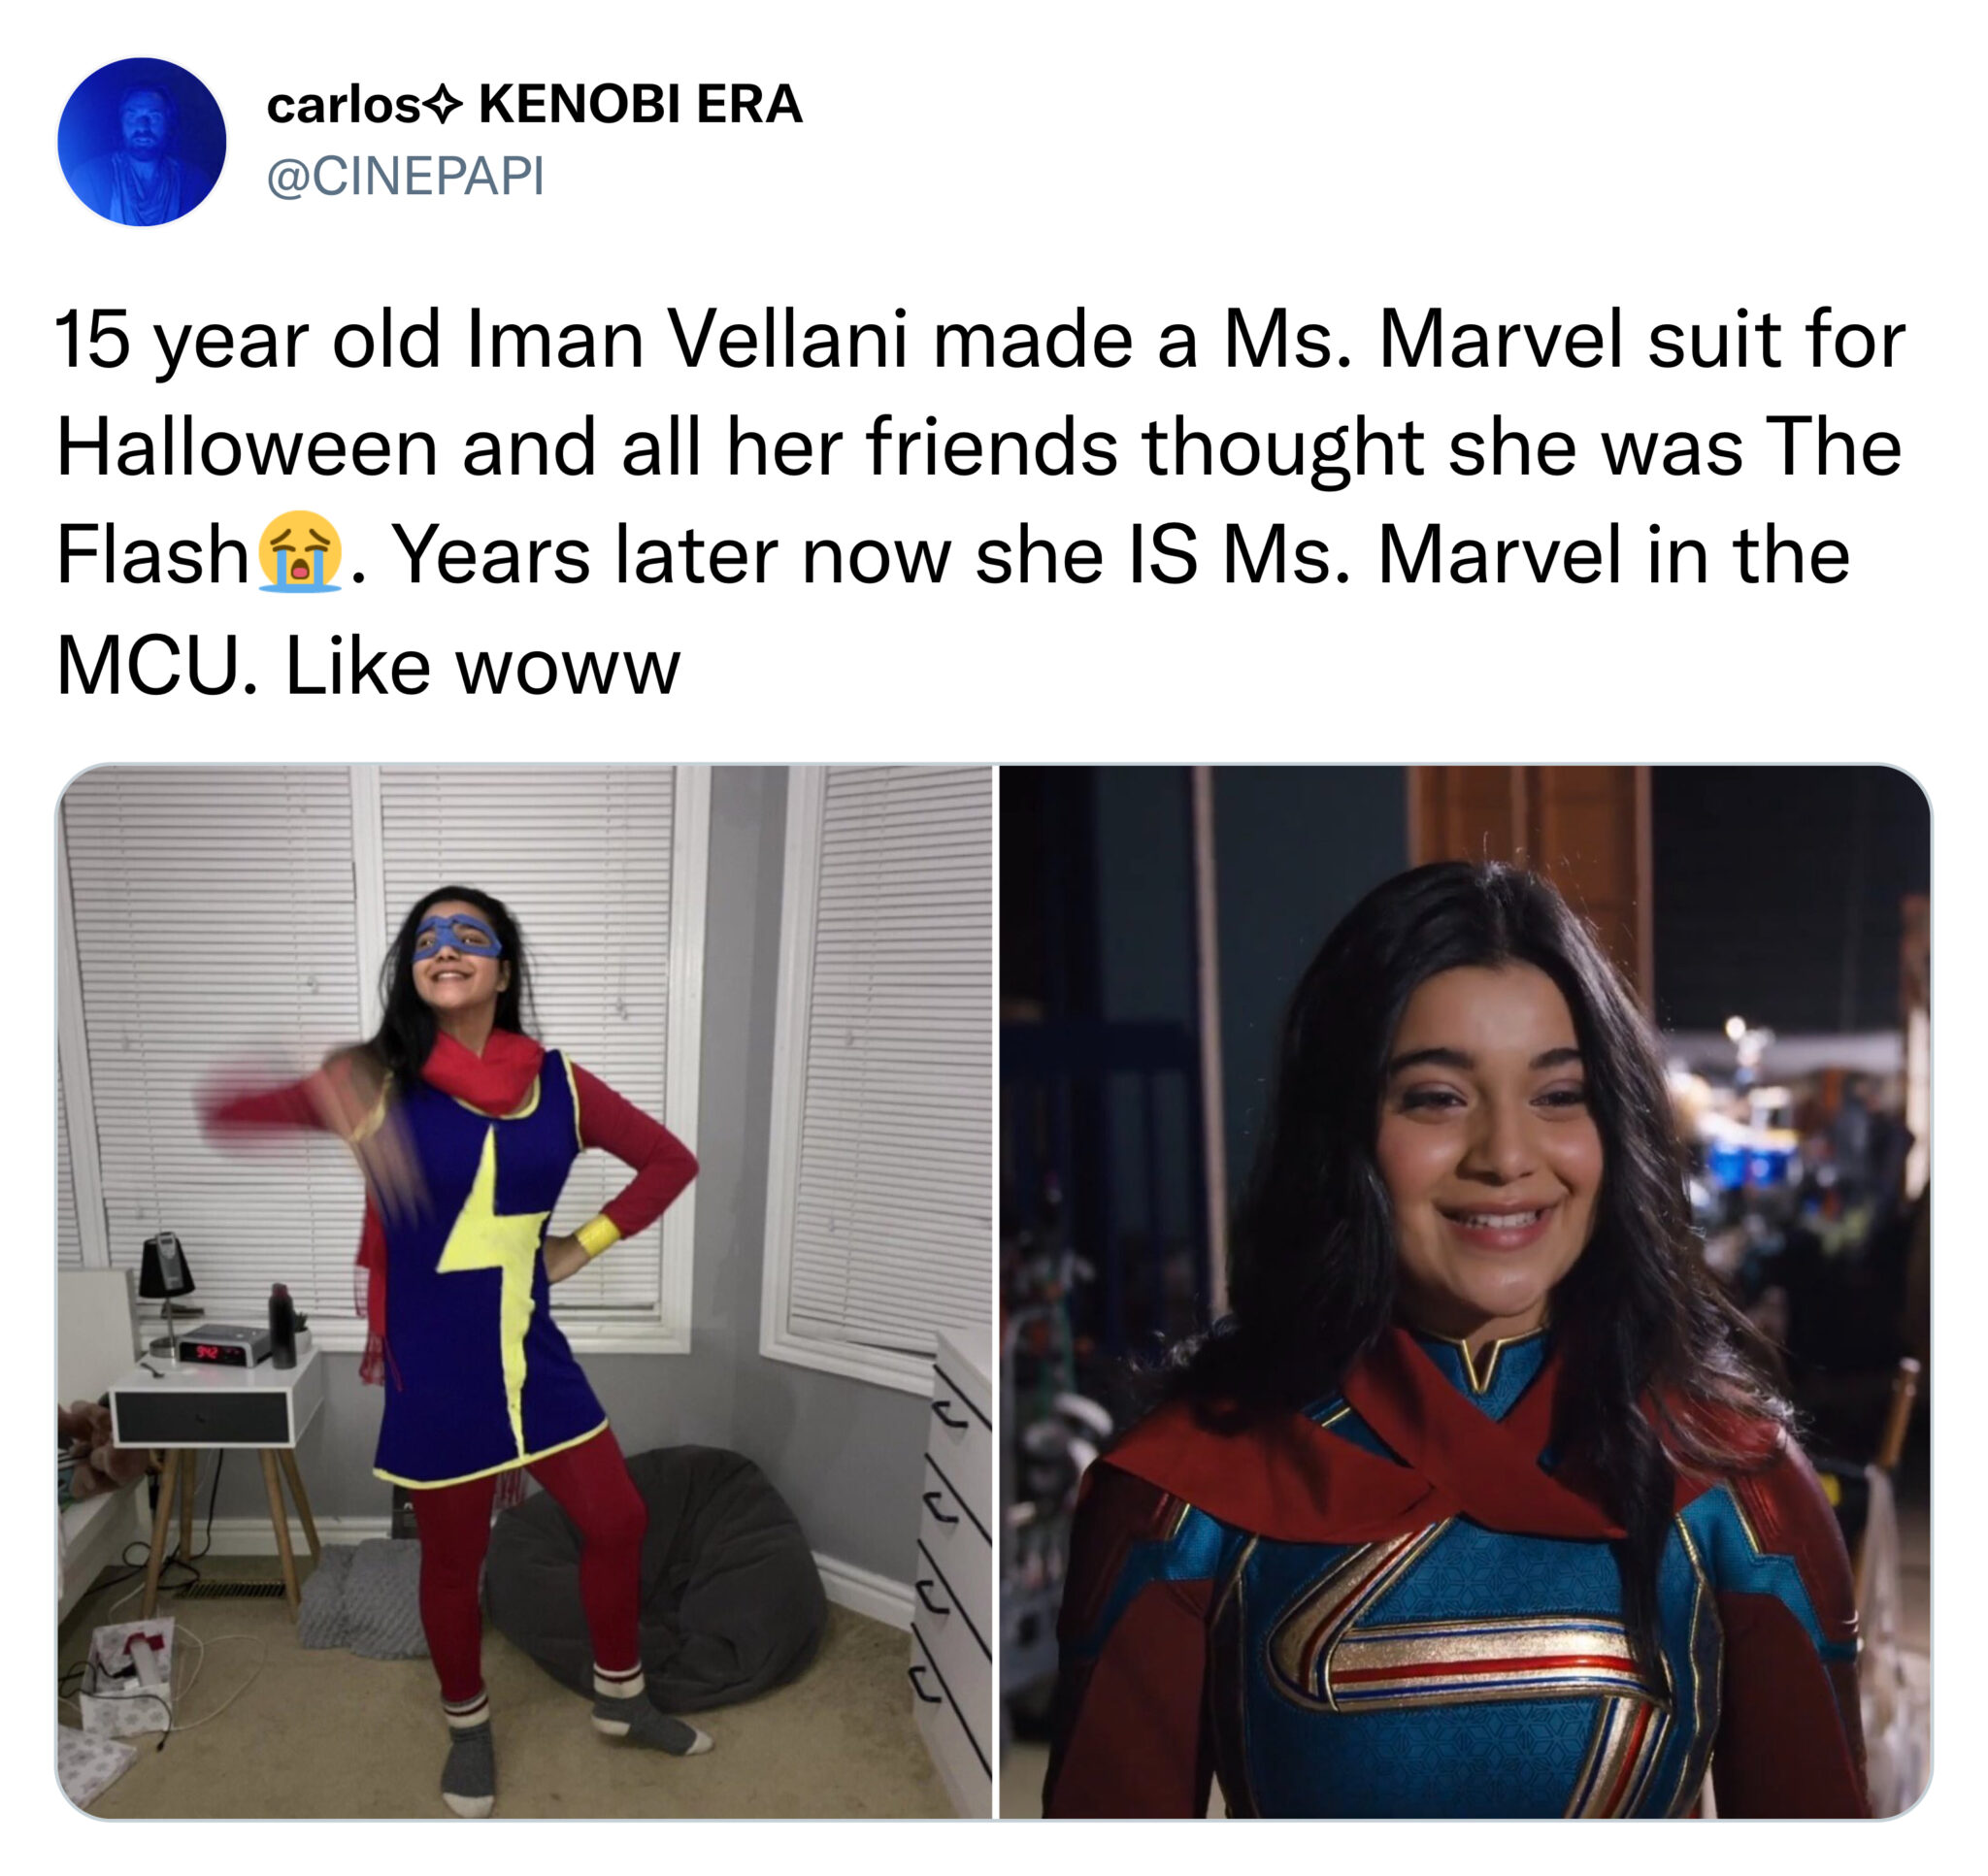 funny tweets  -  shoulder - carlos Kenobi Era 15 year old Iman Vellani made a Ms. Marvel suit for Halloween and all her friends thought she was The Flash. Years later now she Is Ms. Marvel in the Mcu. woww